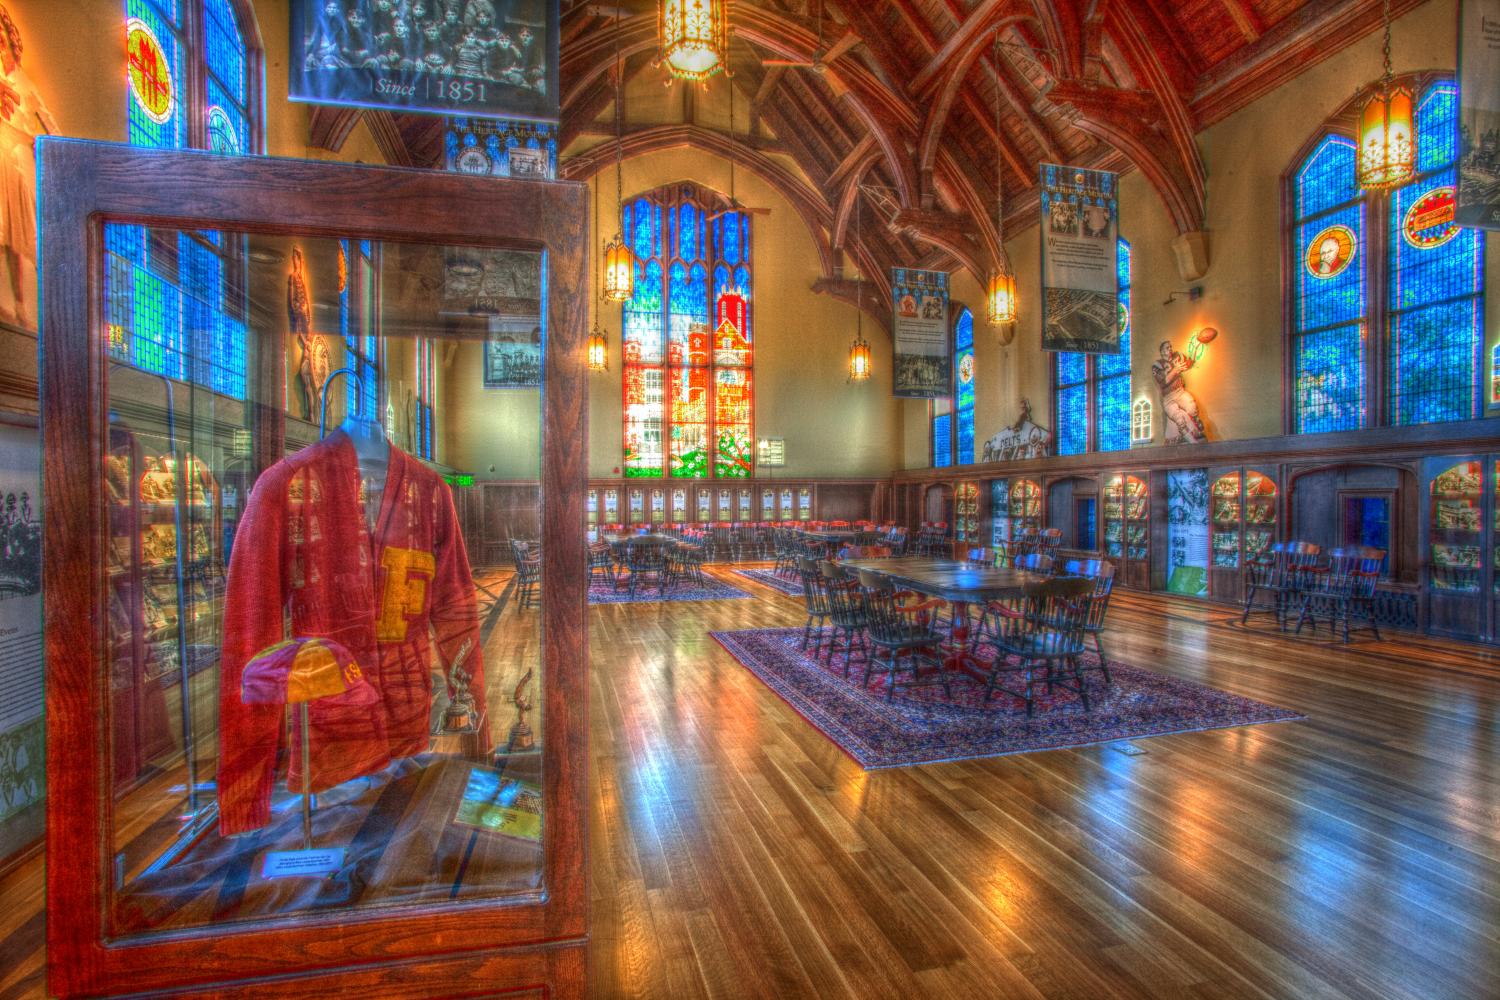 Sunlight filters through the intricate, multicolored stained glass of Dodd Hall's Werkmeister Reading Room, home of the Heritage Museum. The light reflects off of the smooth hardwood floors.